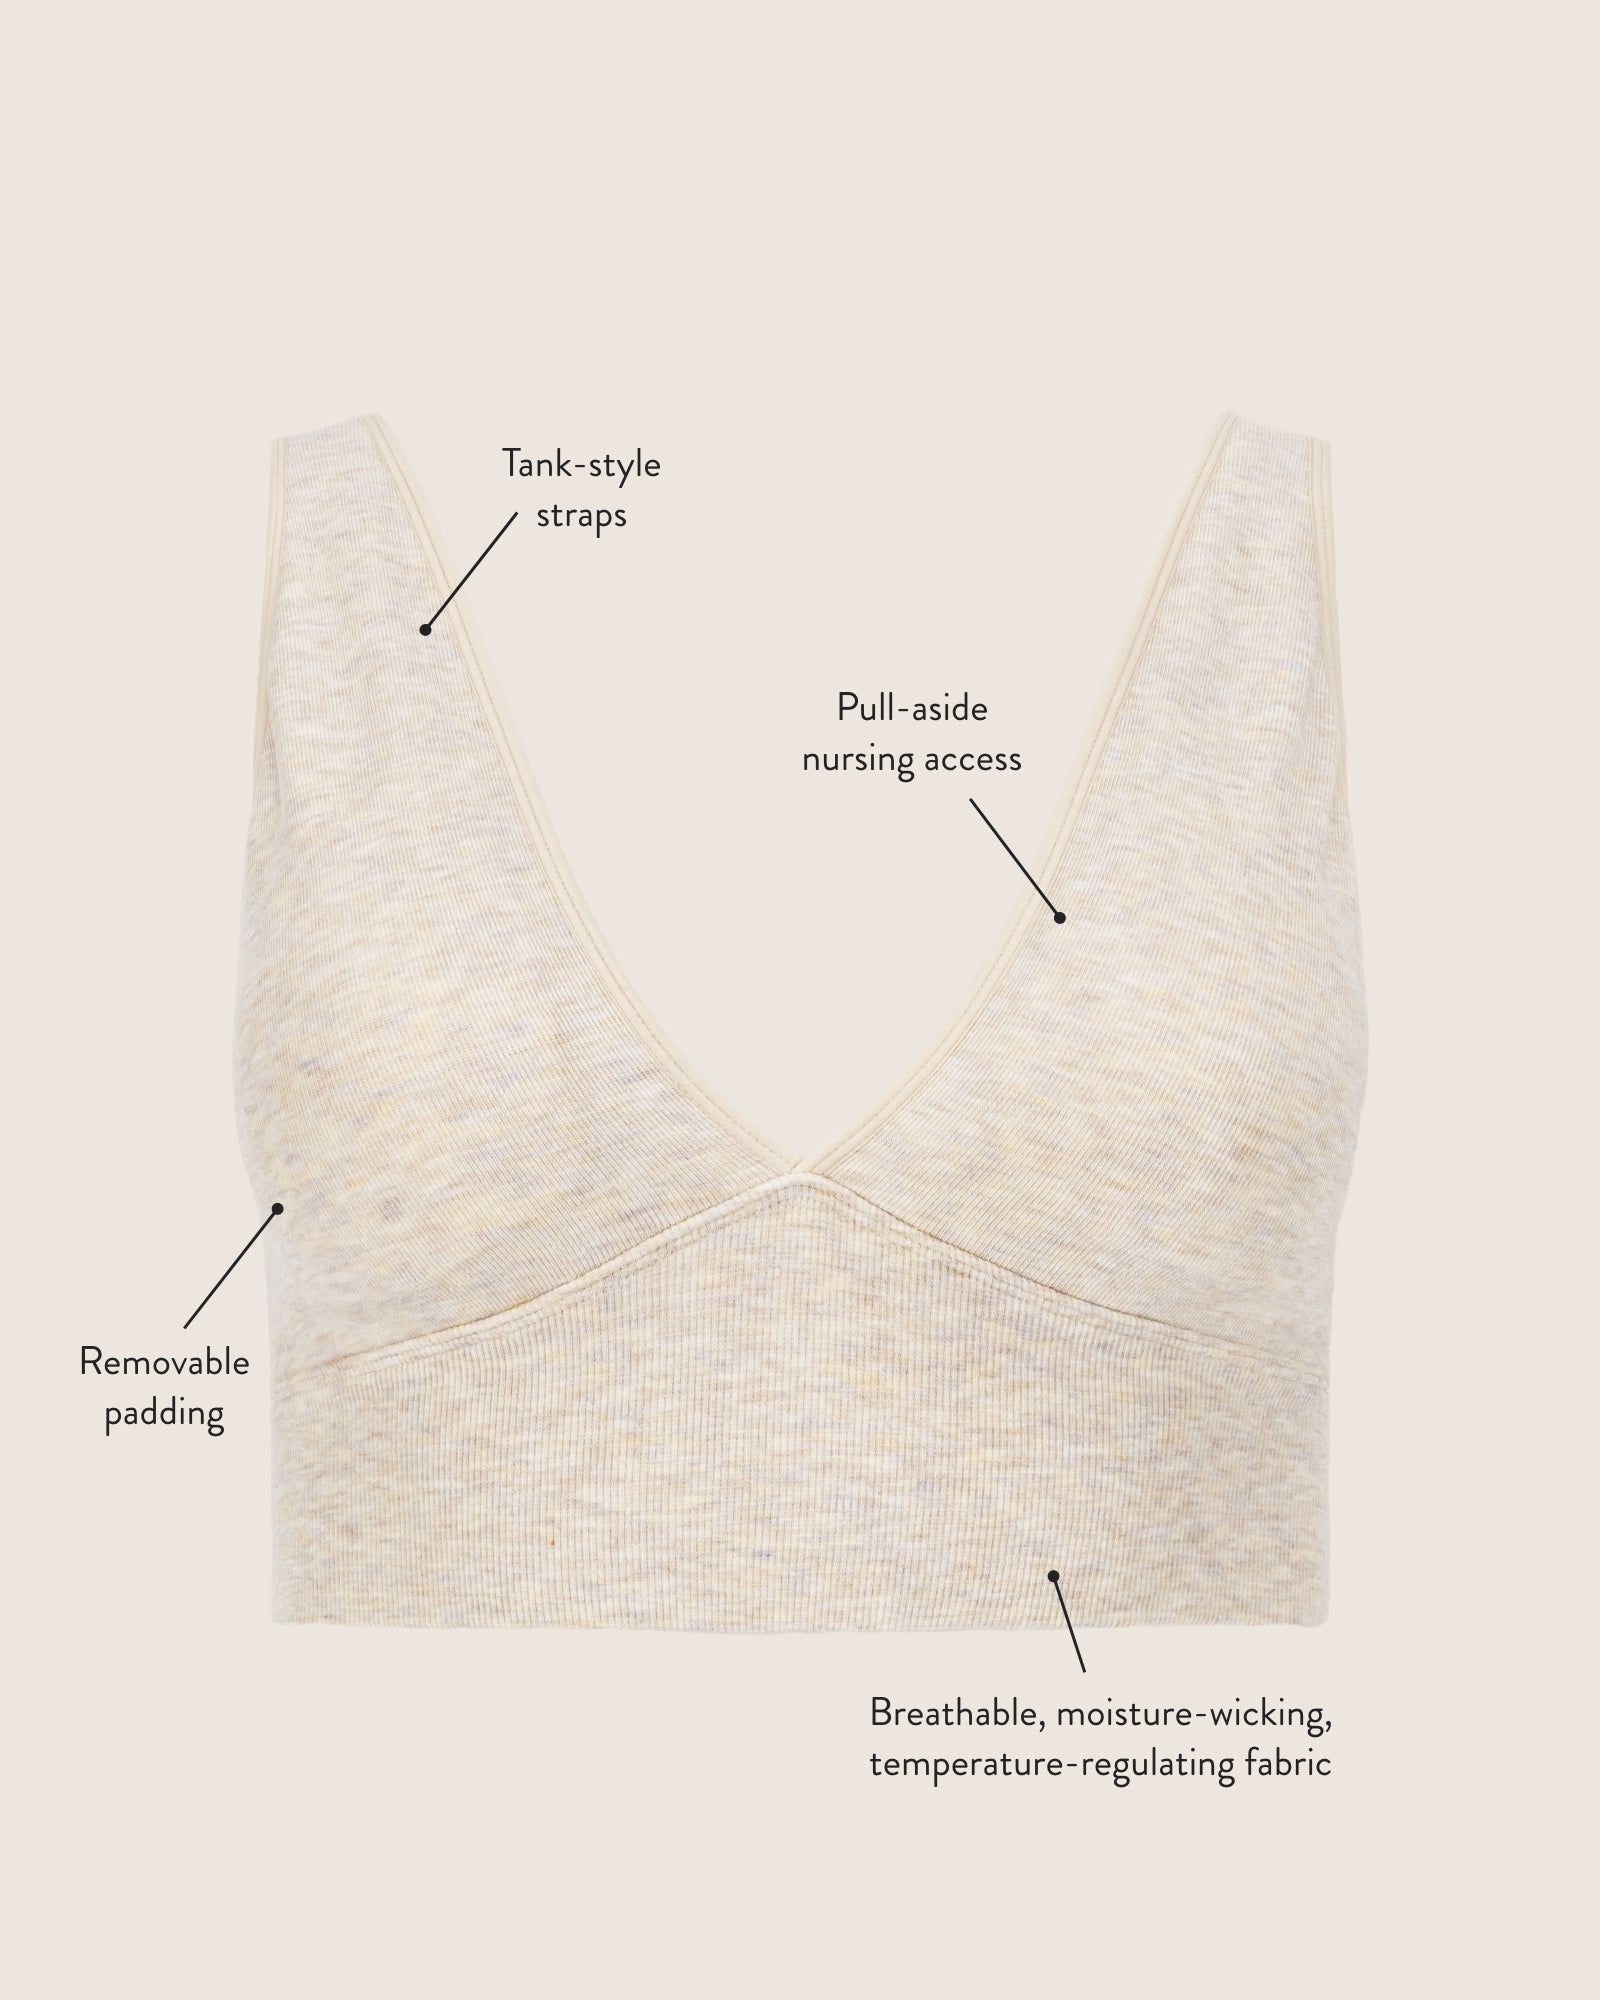 Infographic image of unique features of the Sublime Bamboo Maternity & Nursing Plunge Bra. Call-outs include Removable padding, breathable & moisture wicking fabric plus pull-aside nursing access. 